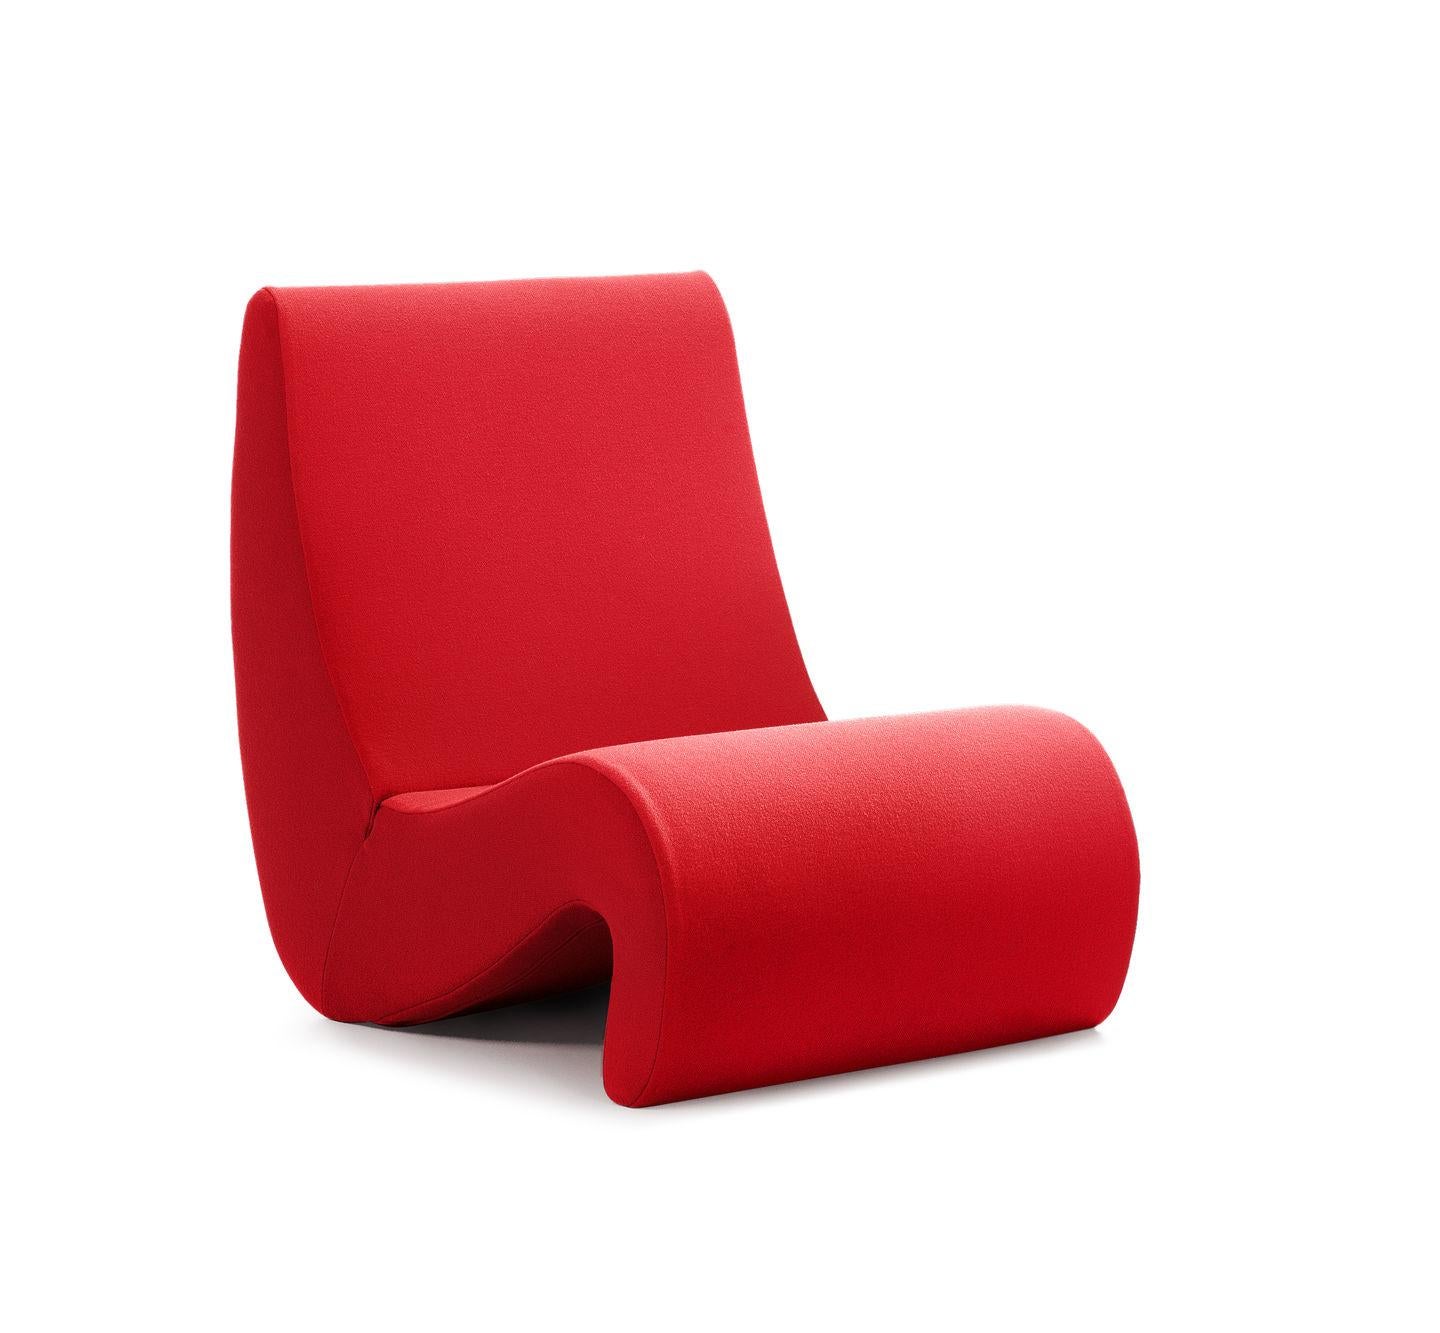 Chair designed by Verner Panton in 1970.
Manufactured by Vitra, Switzerland.

The Amoebe chair by Verner Panton is characterised by its organic shape and the wide variety of bold colours available for the cover fabric. The soft upholstery